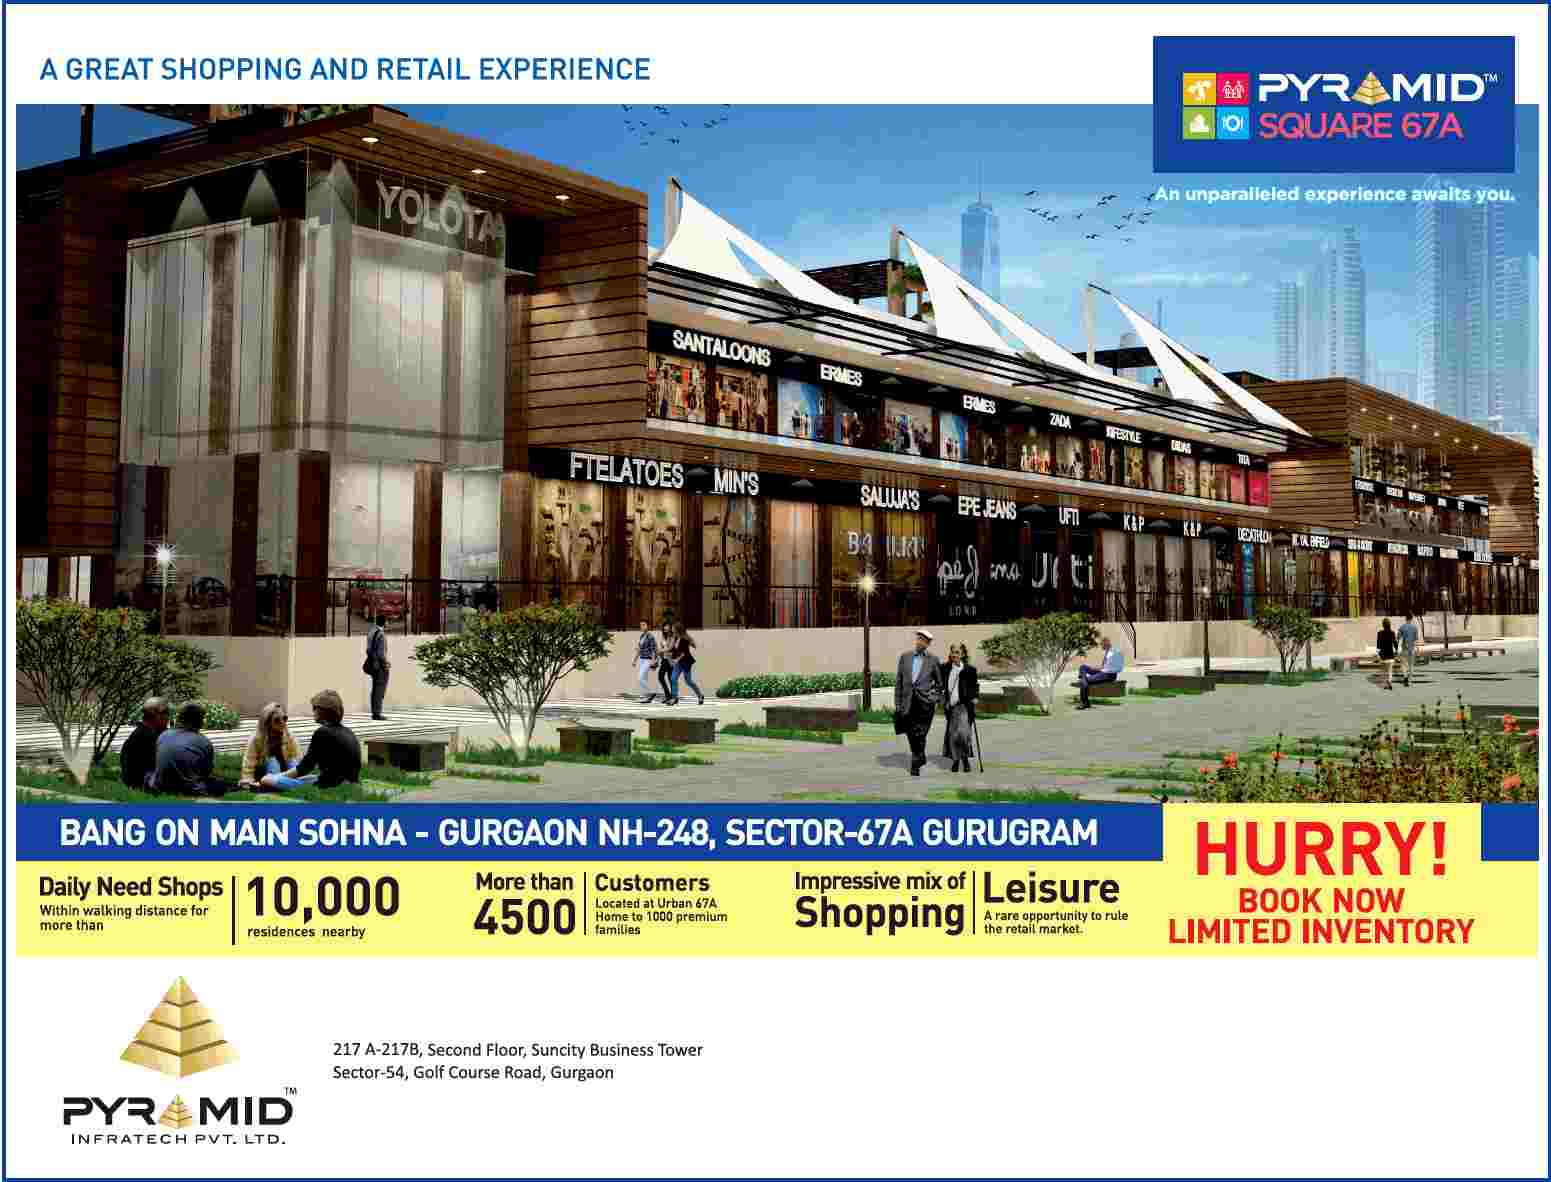 Pyramid Square 67A will give you great shopping and retail experience in Gurgaon